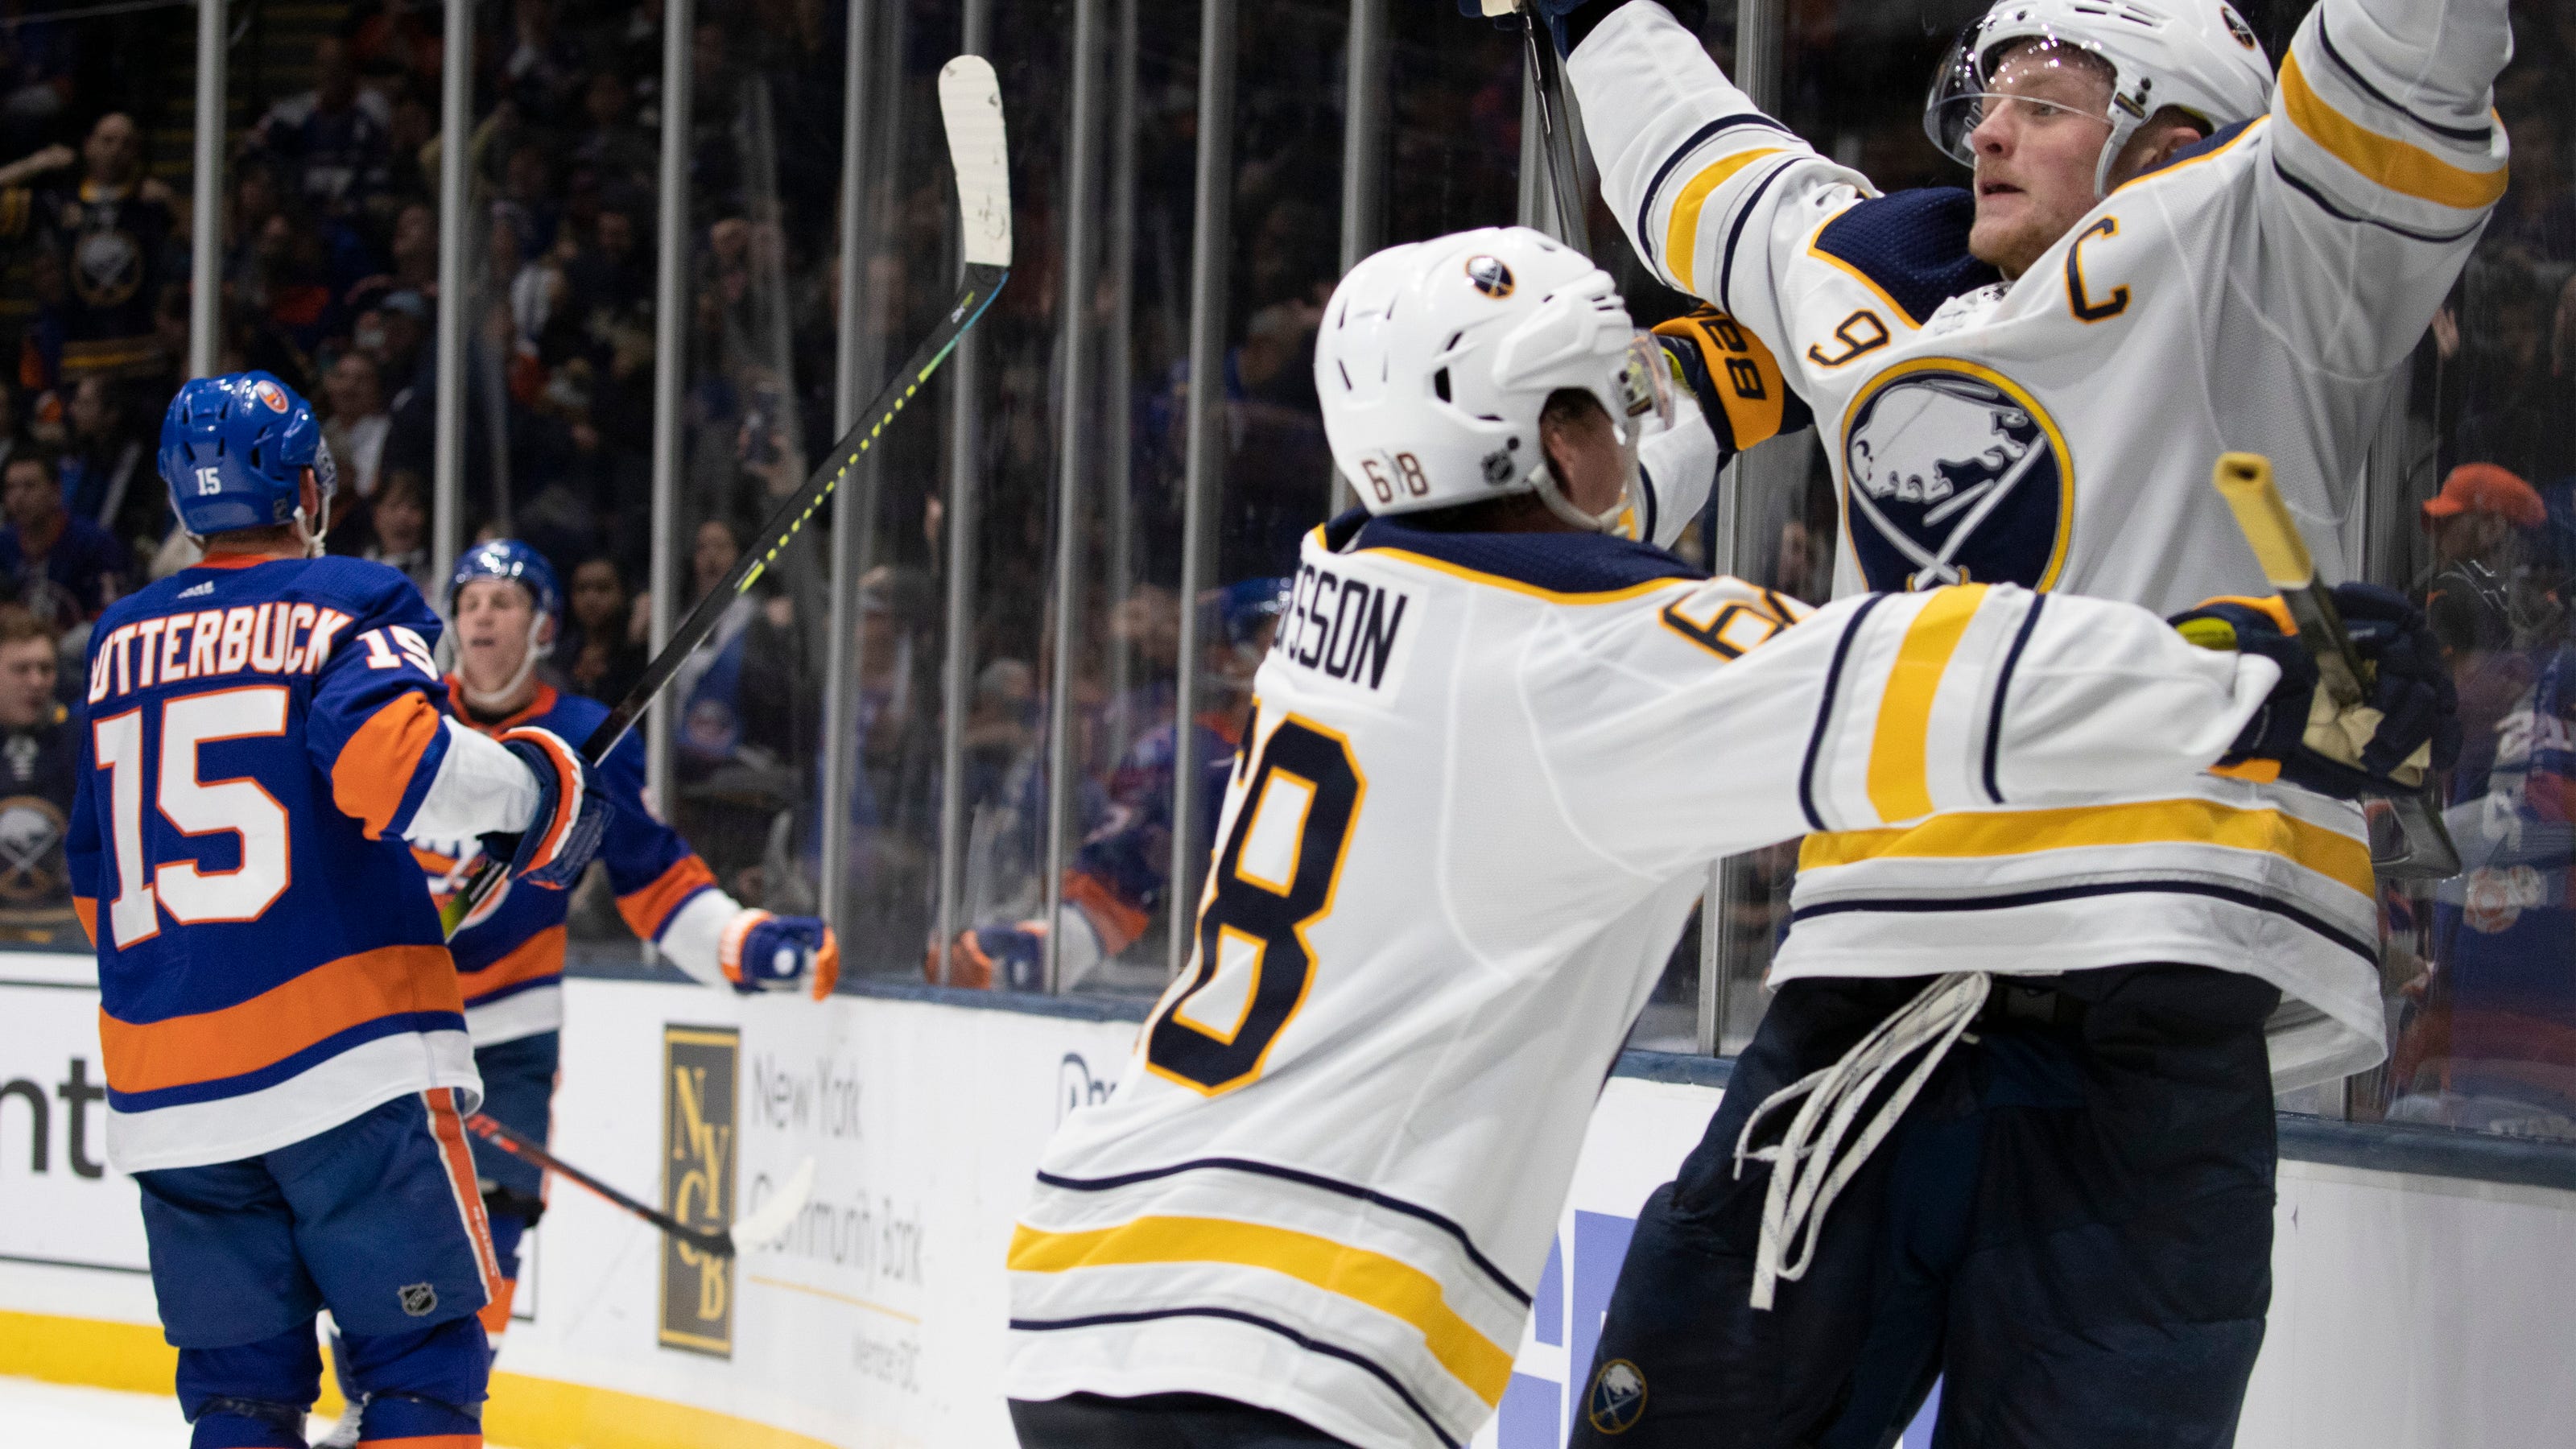 NHL rookie scoring leader, Buffalo's Olofsson, out 56 weeks